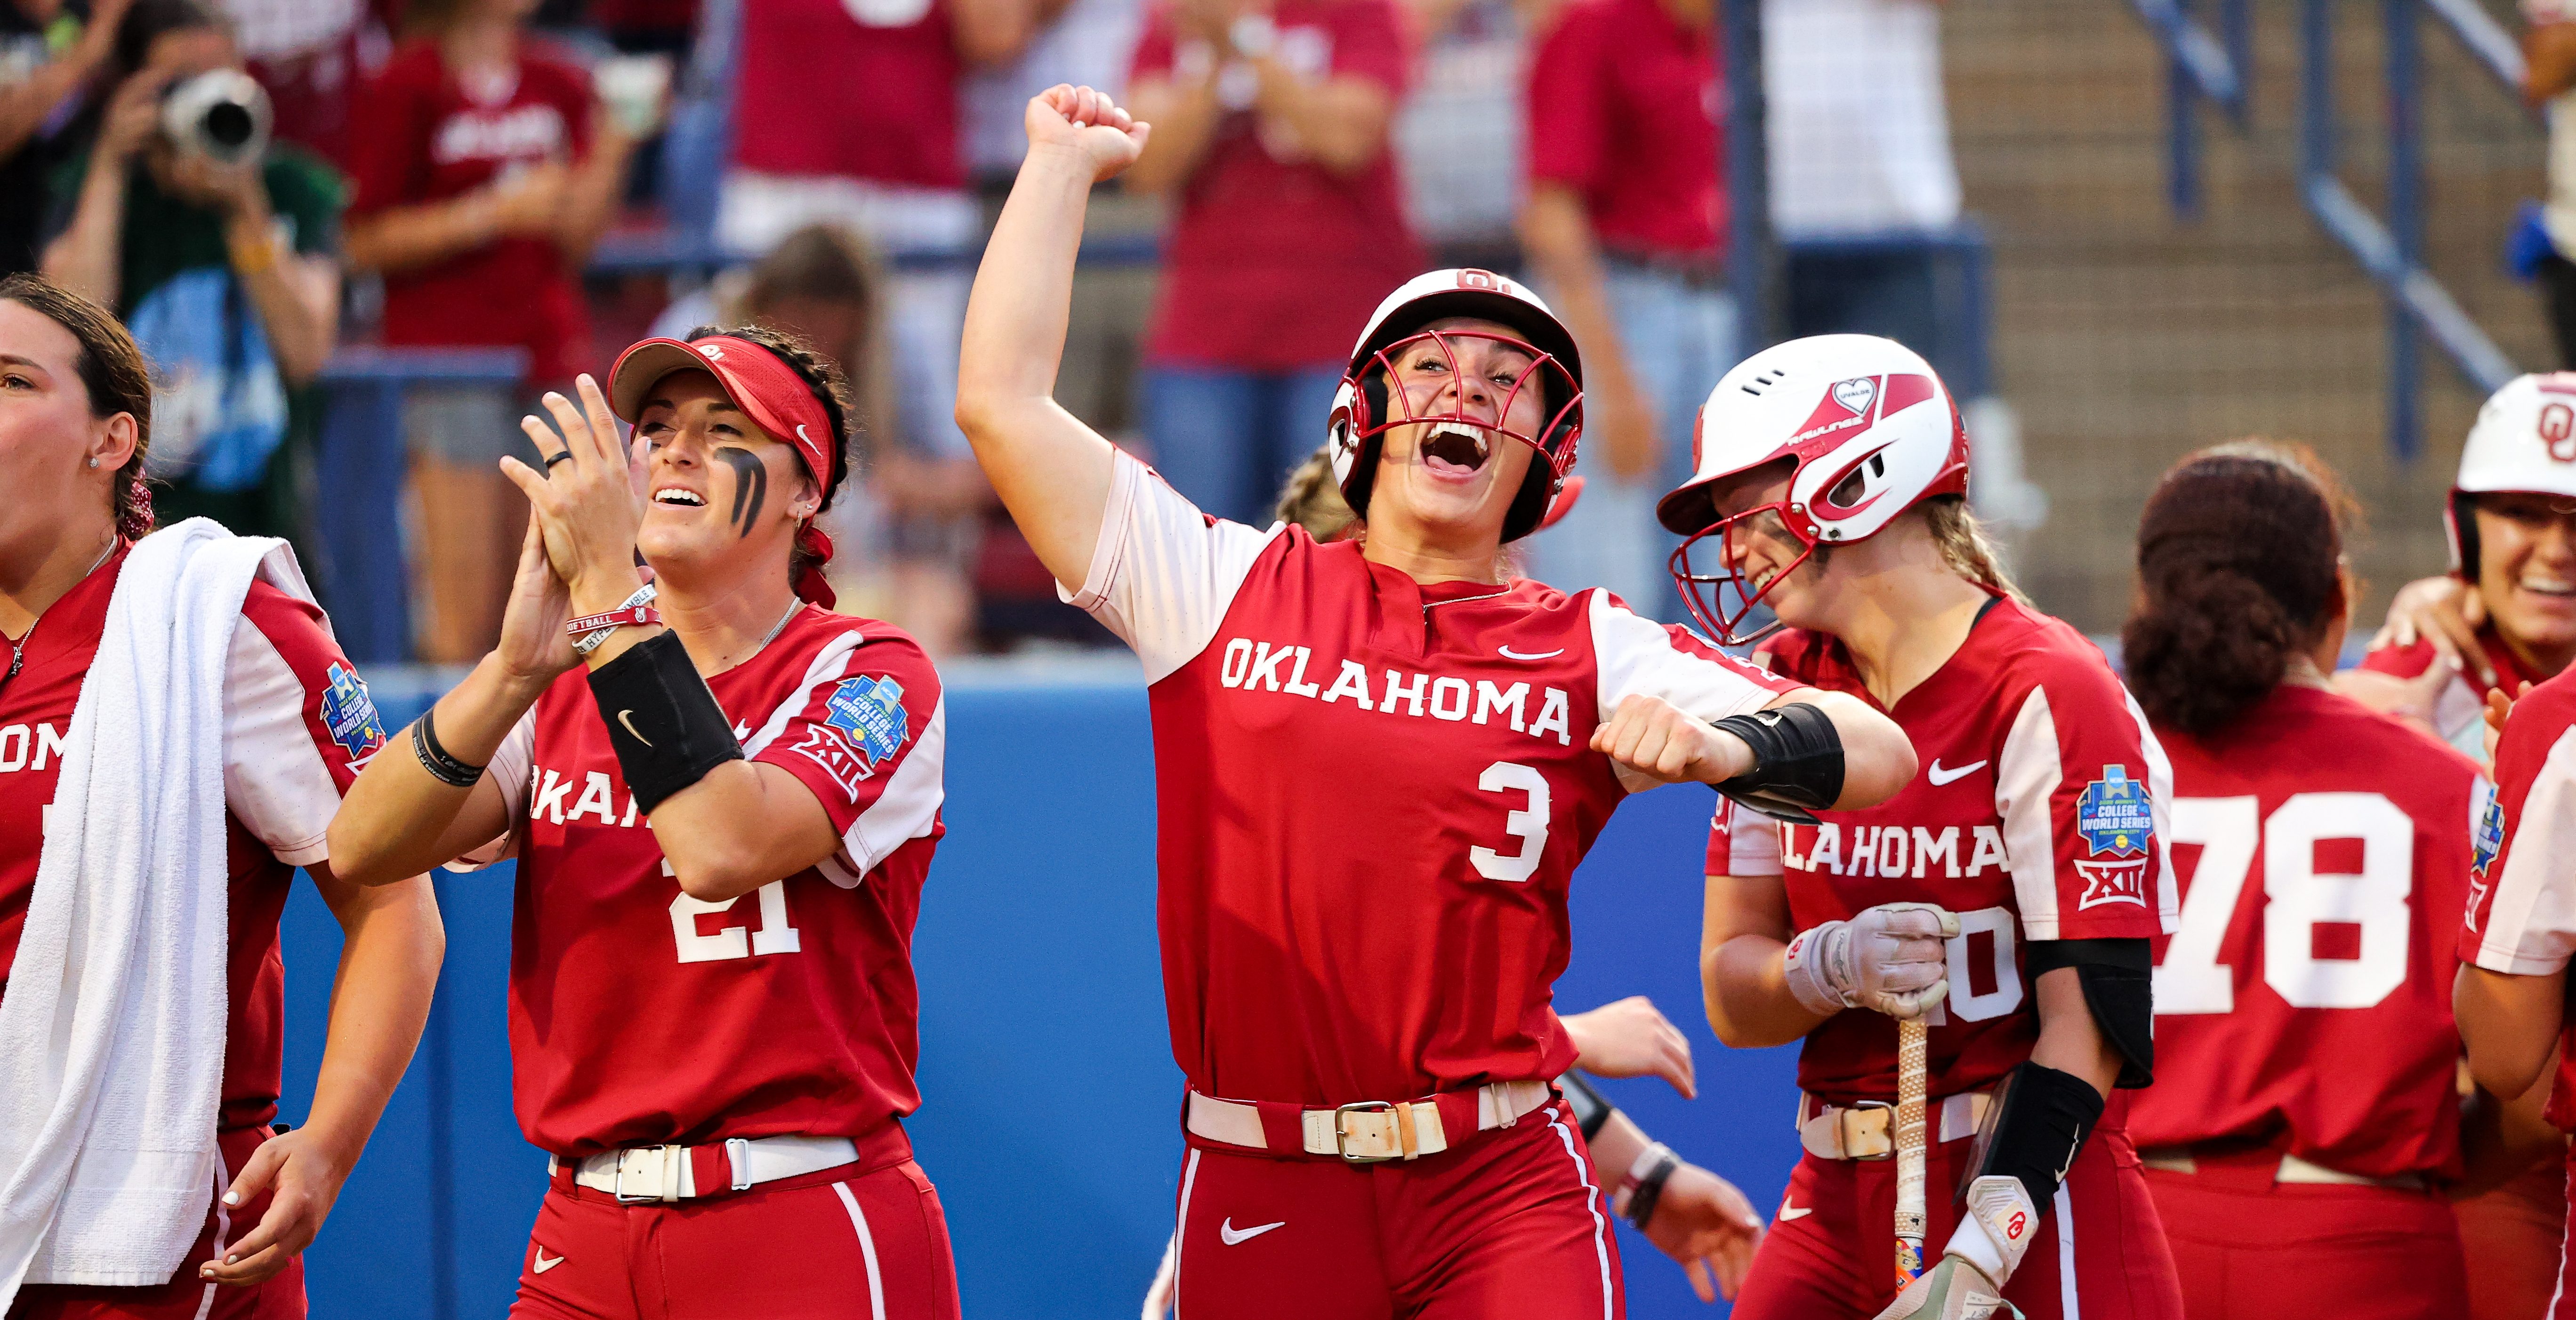 OKLAHOMA CITY, OK - JUNE 09: Grace Lyons #3 of the Oklahoma Sooners reacts to scoring on a home run during the fifth inning against the Texas Longhorns during the Division I Womens Softball Championship held at ASA Hall of Fame Stadium on June 9, 2022 in Oklahoma City, Oklahoma.